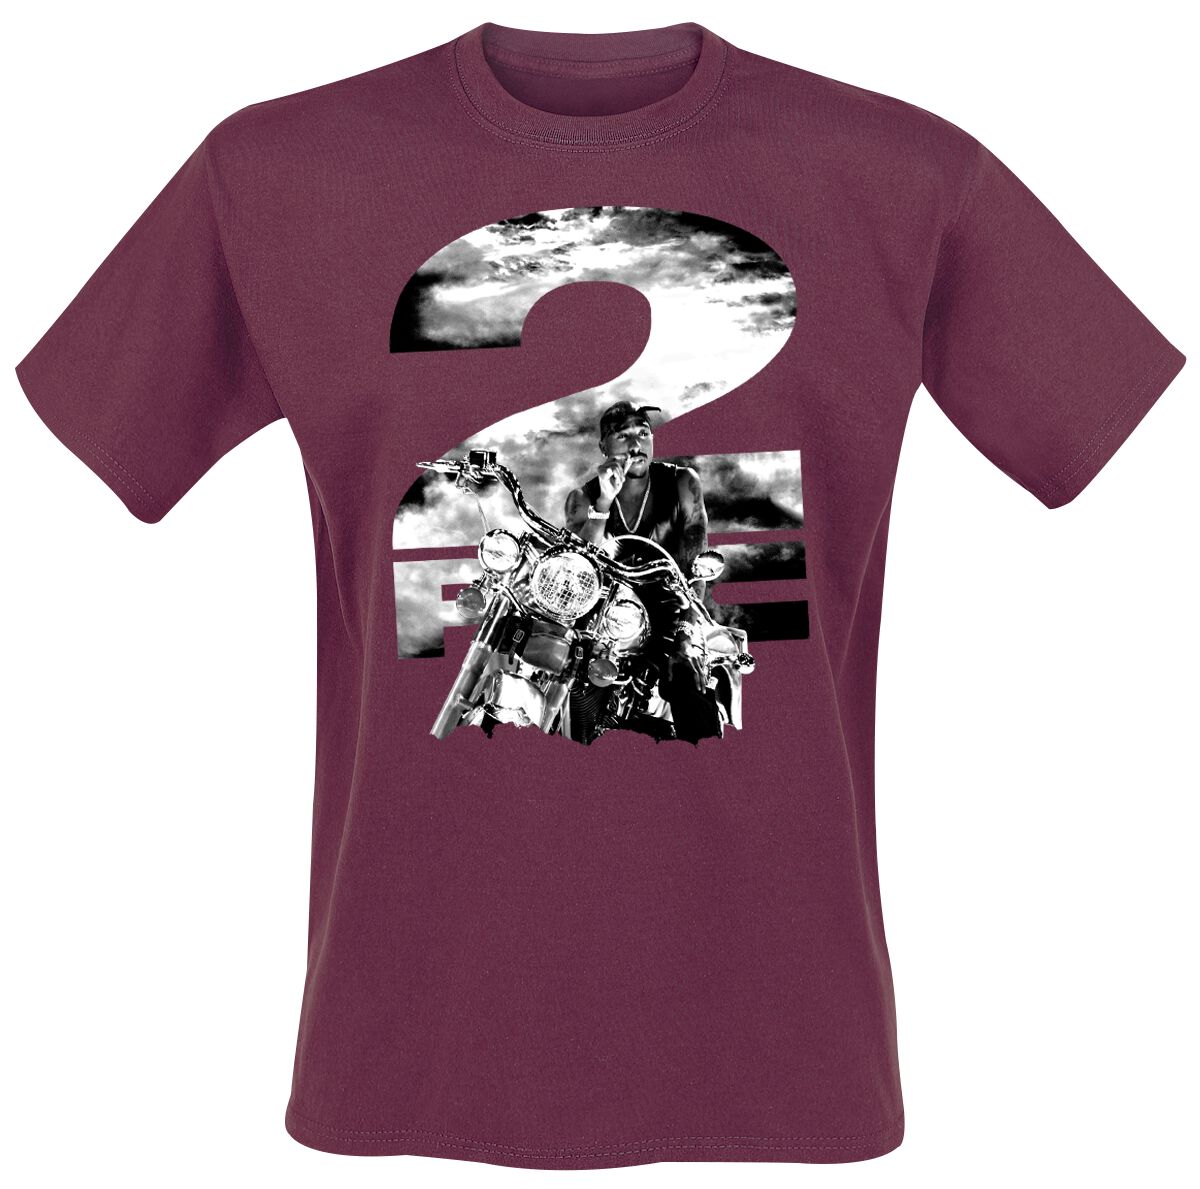 Image of Tupac Shakur Fist In The Clouds T-Shirt burgund